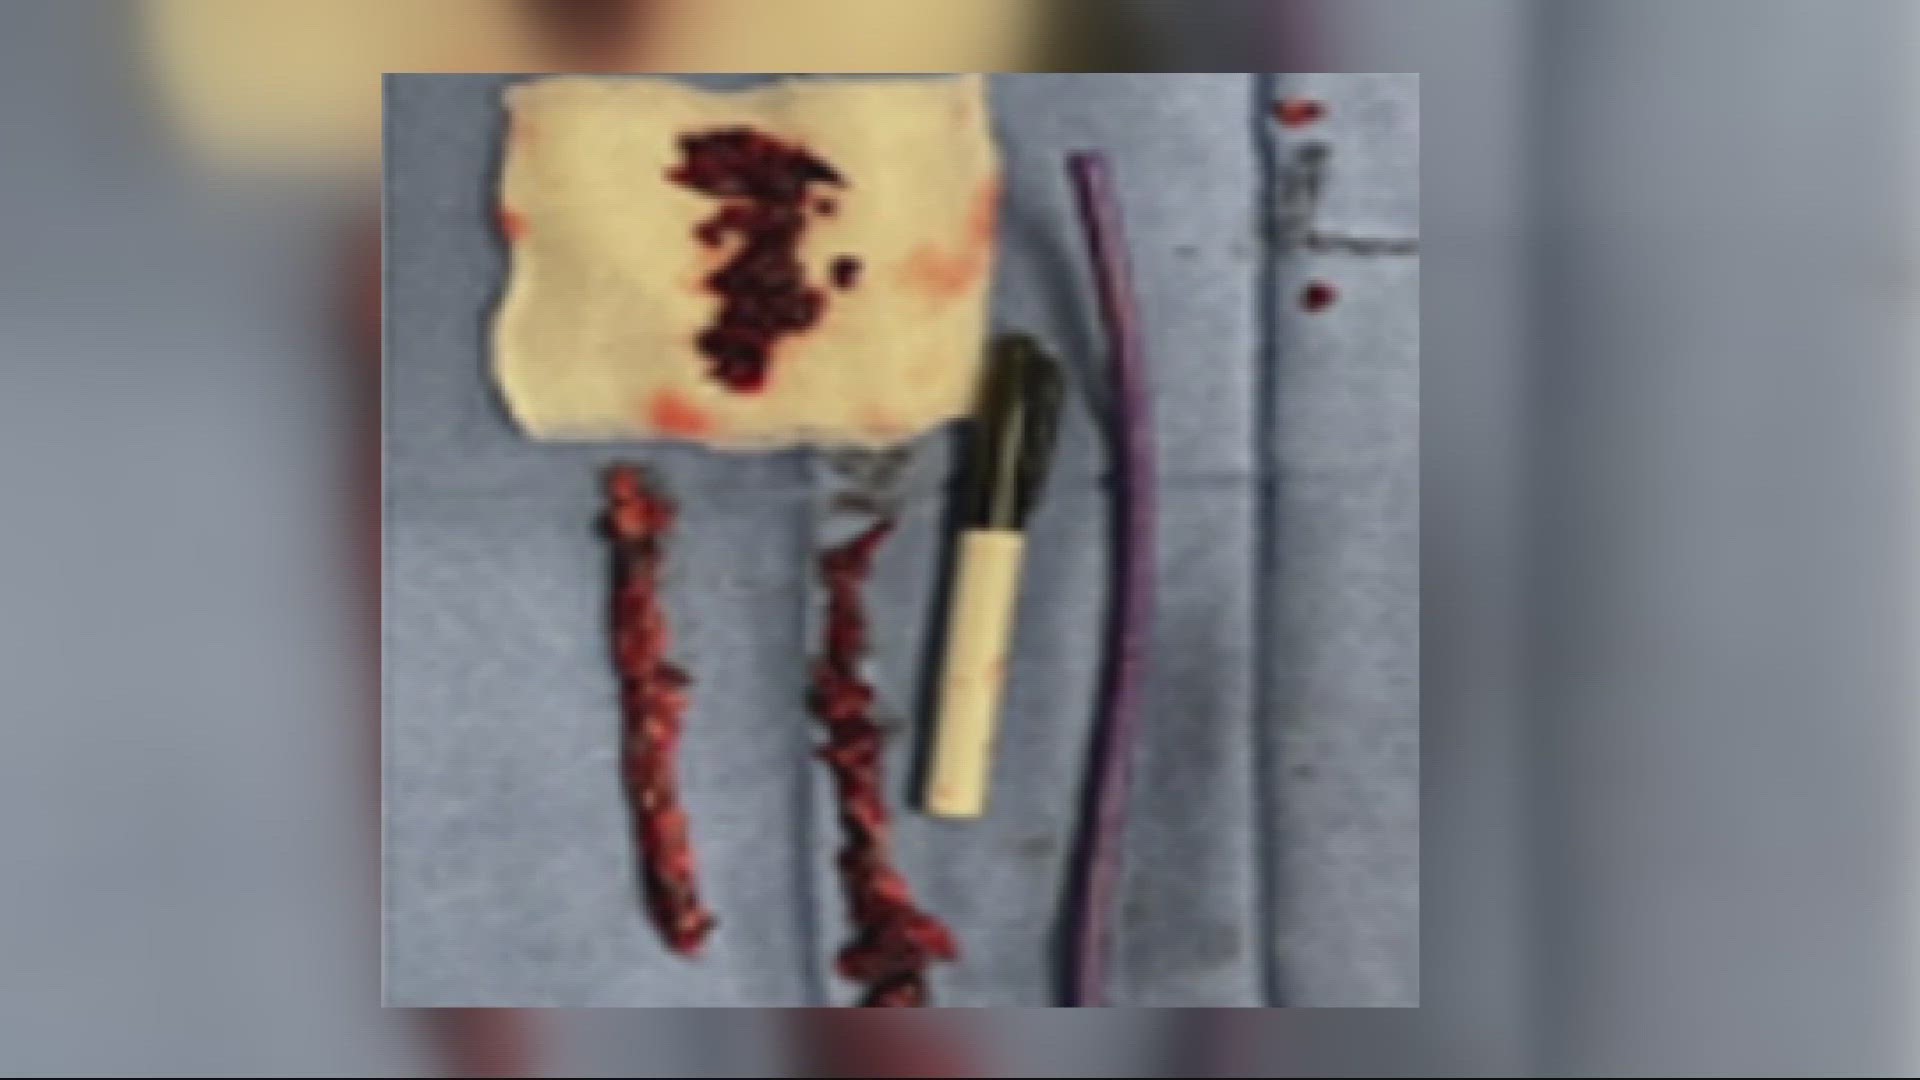 Doctors at HCA Florida Memorial hospital pulled out blood clots from a man's lung that were eight to nine inches long.